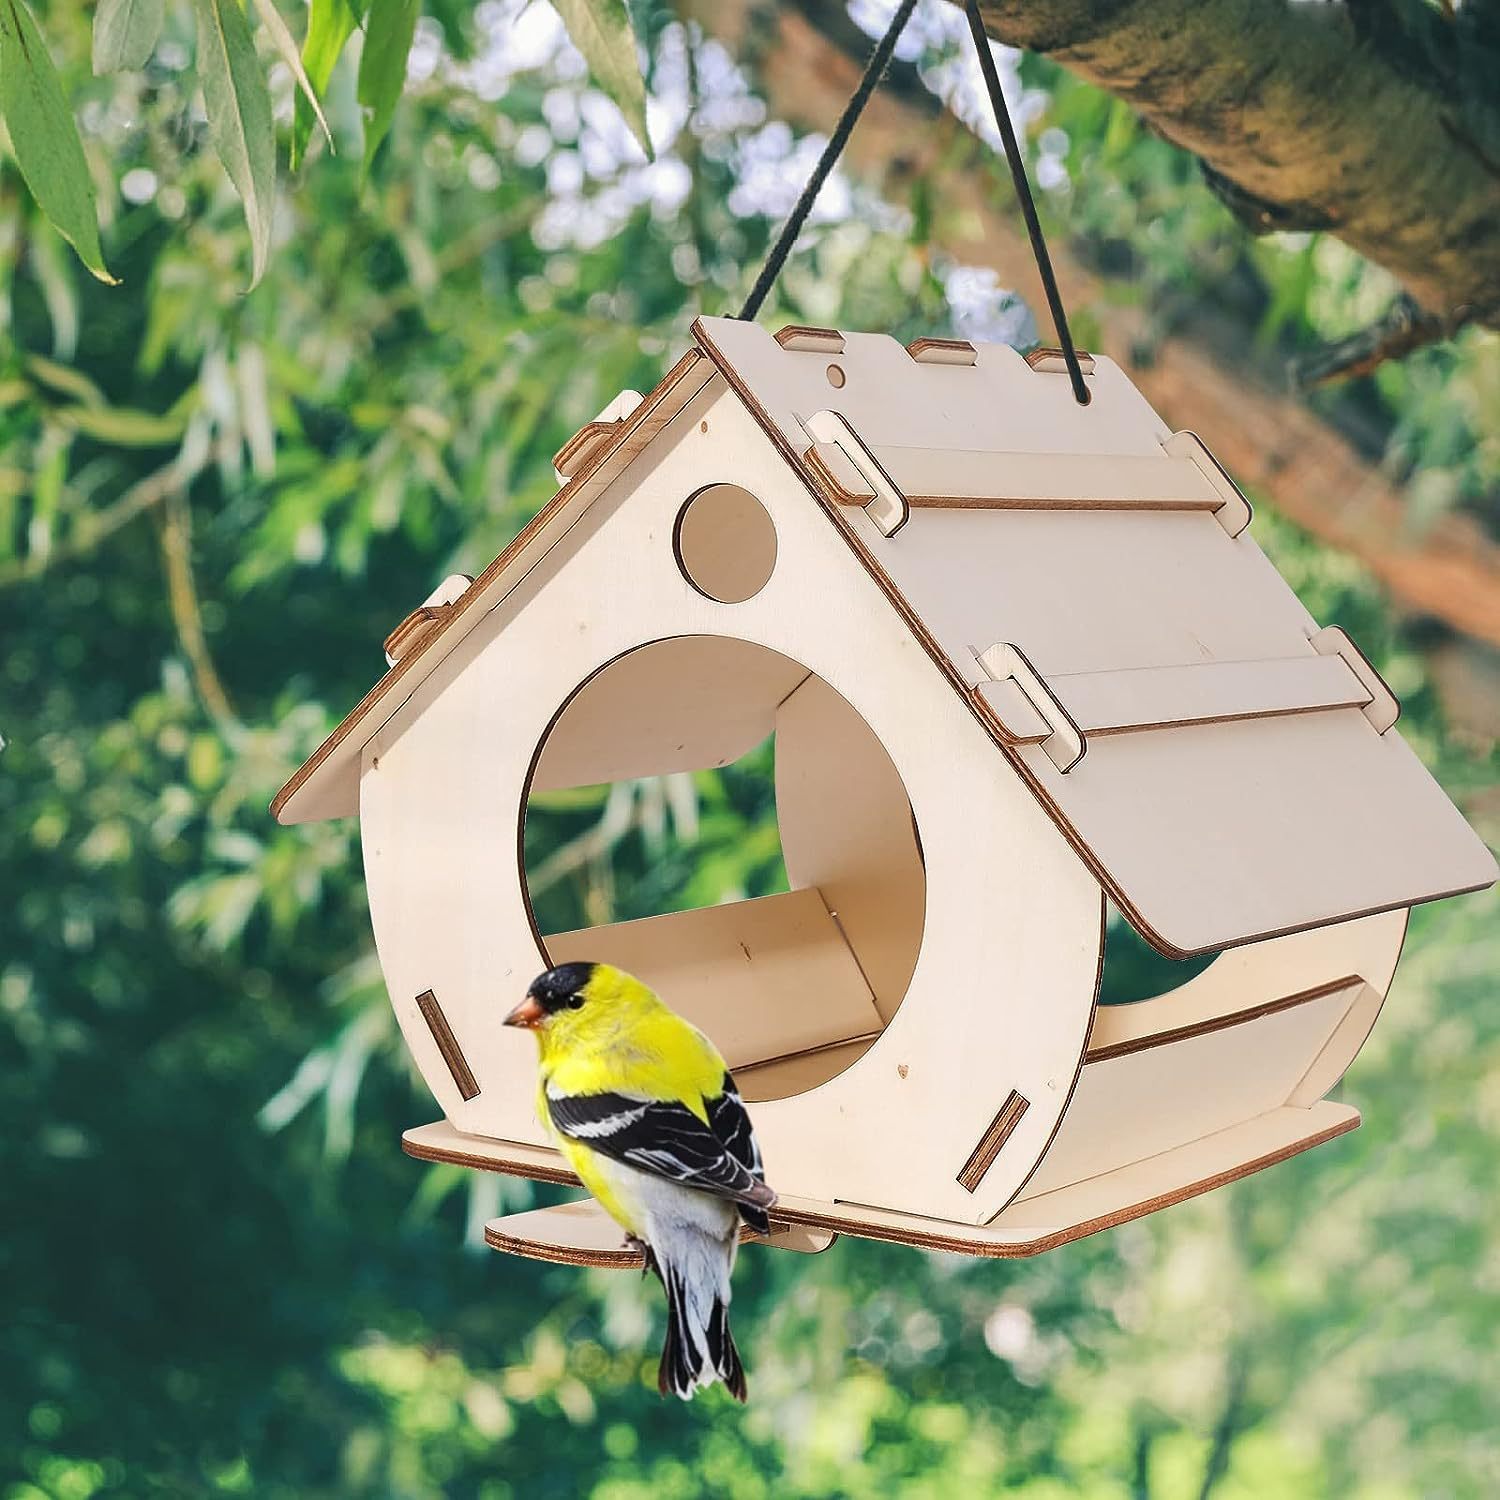 

1pc Wooden Bird Feeder, Hanging Bird House, Diy Assembly, Hanging Outdoor Garden Decor, Bird Cage Nest, Sturdy Wood Bird Feeder For Yard Garden Decoration, Easy To Install, 8.9in X 7.1in X 5.7in